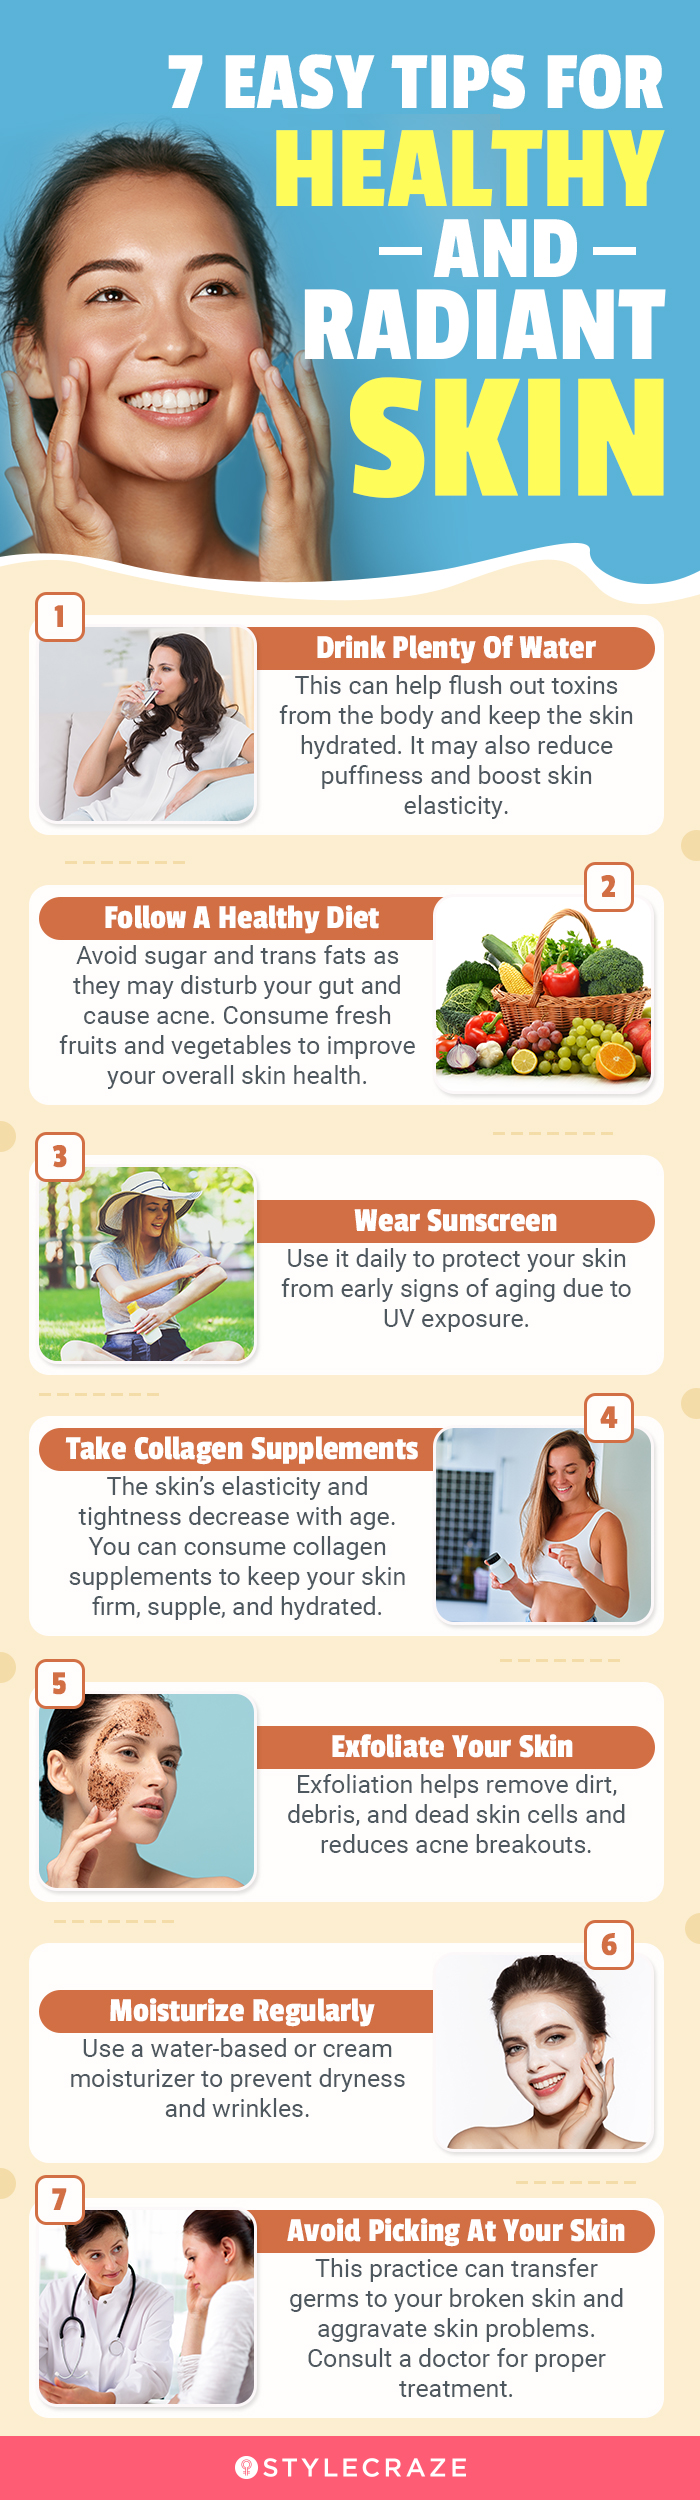 7 easy tips for healthy and radiant skin (infographic)